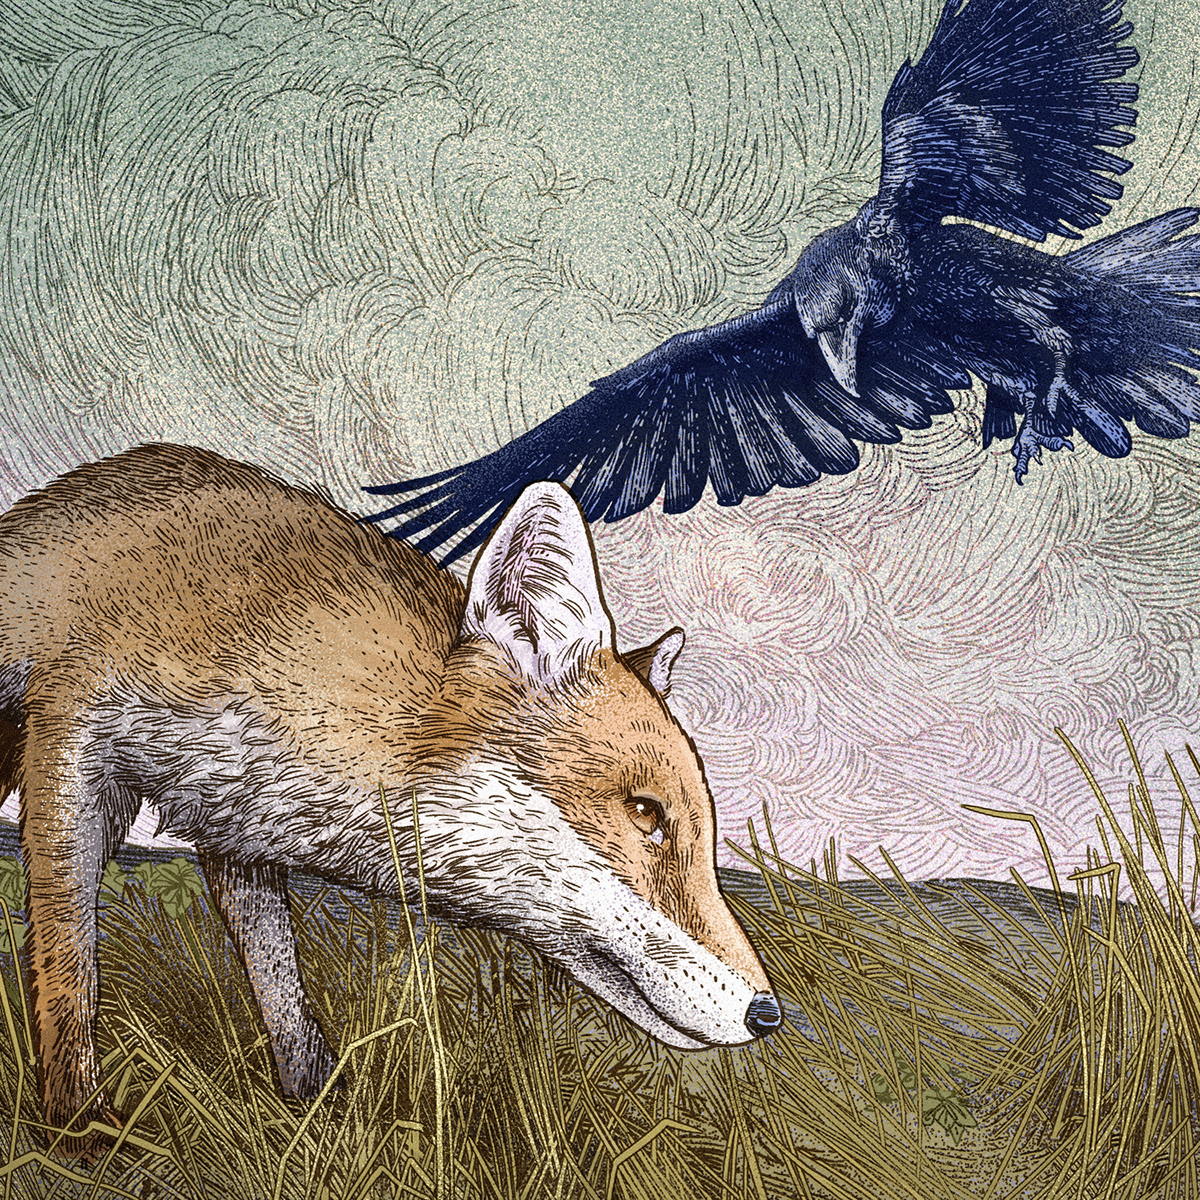 An illustration of a Fox and a Crow. Close-Up